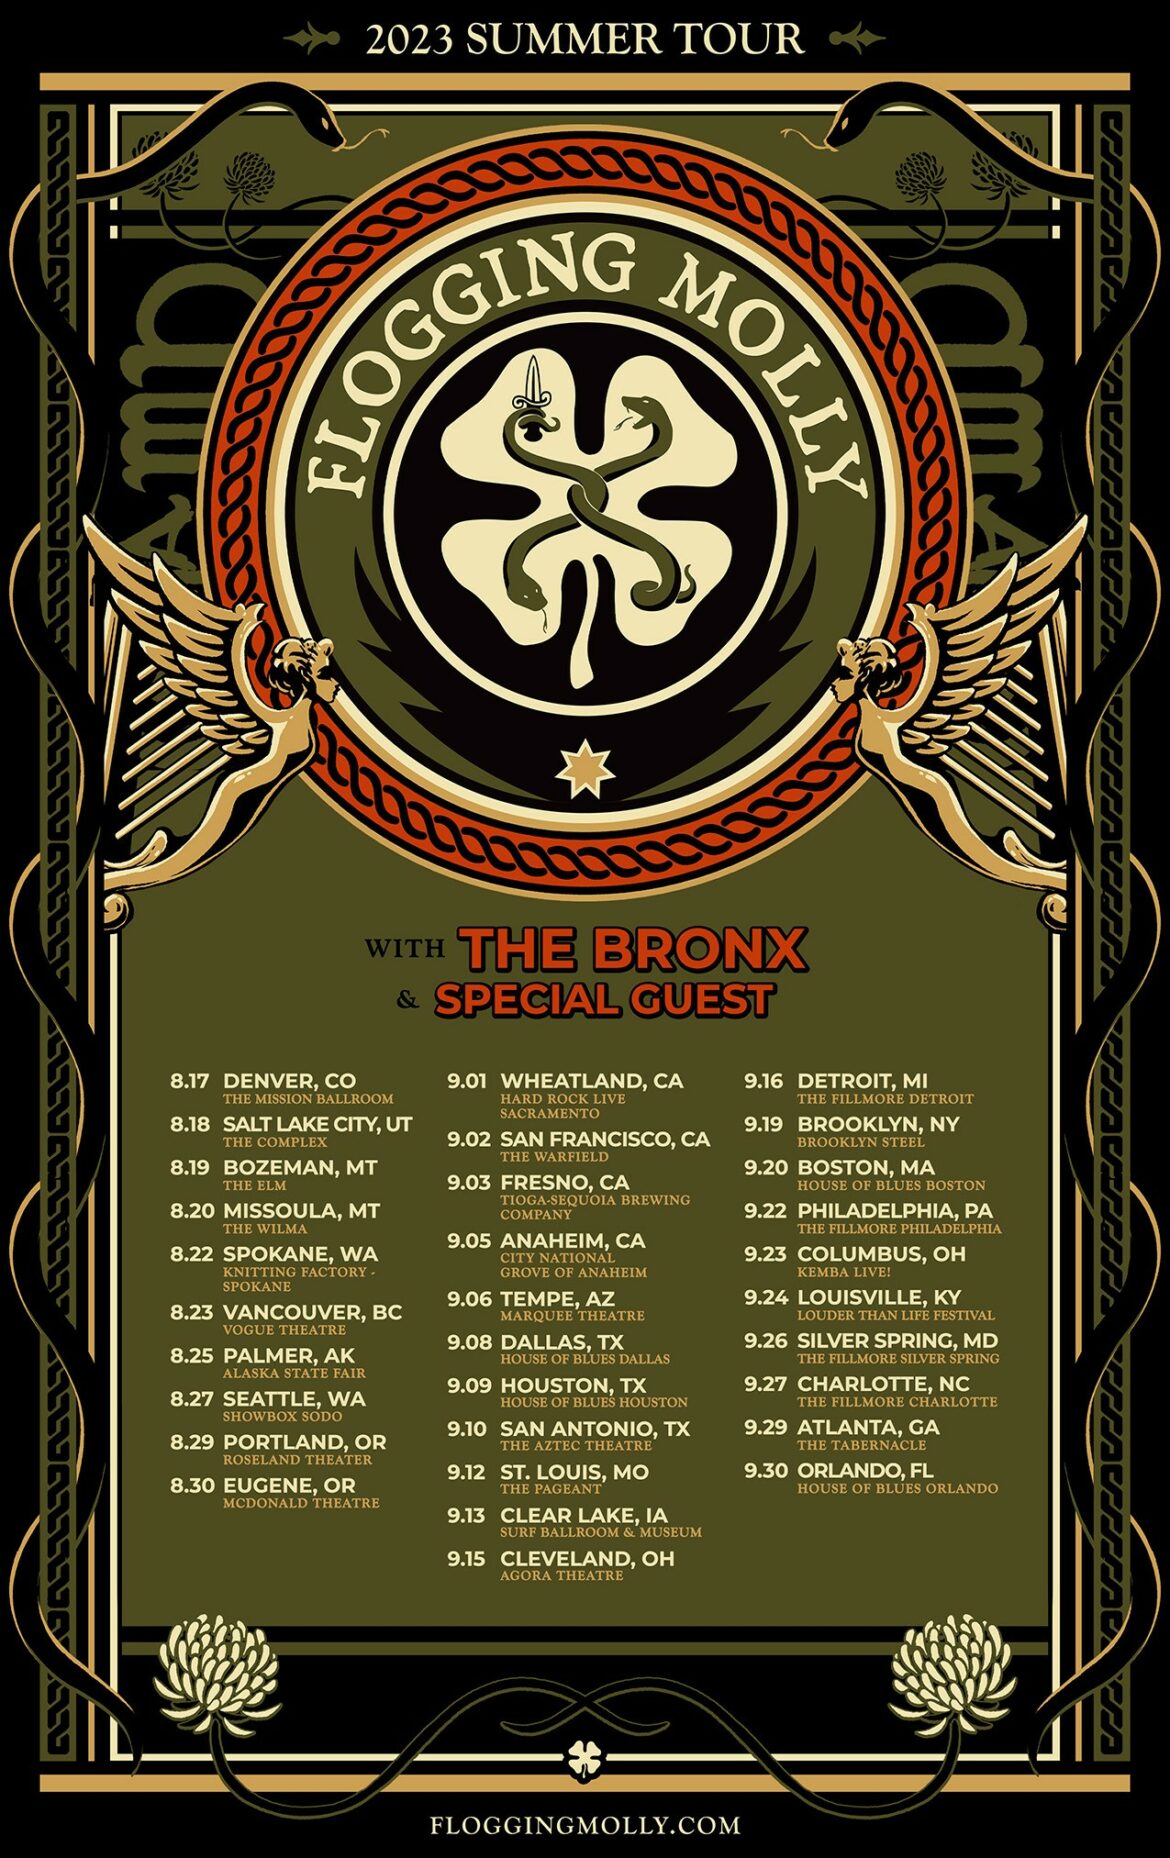 Flogging Molly Announce North America Tour with The Bronx